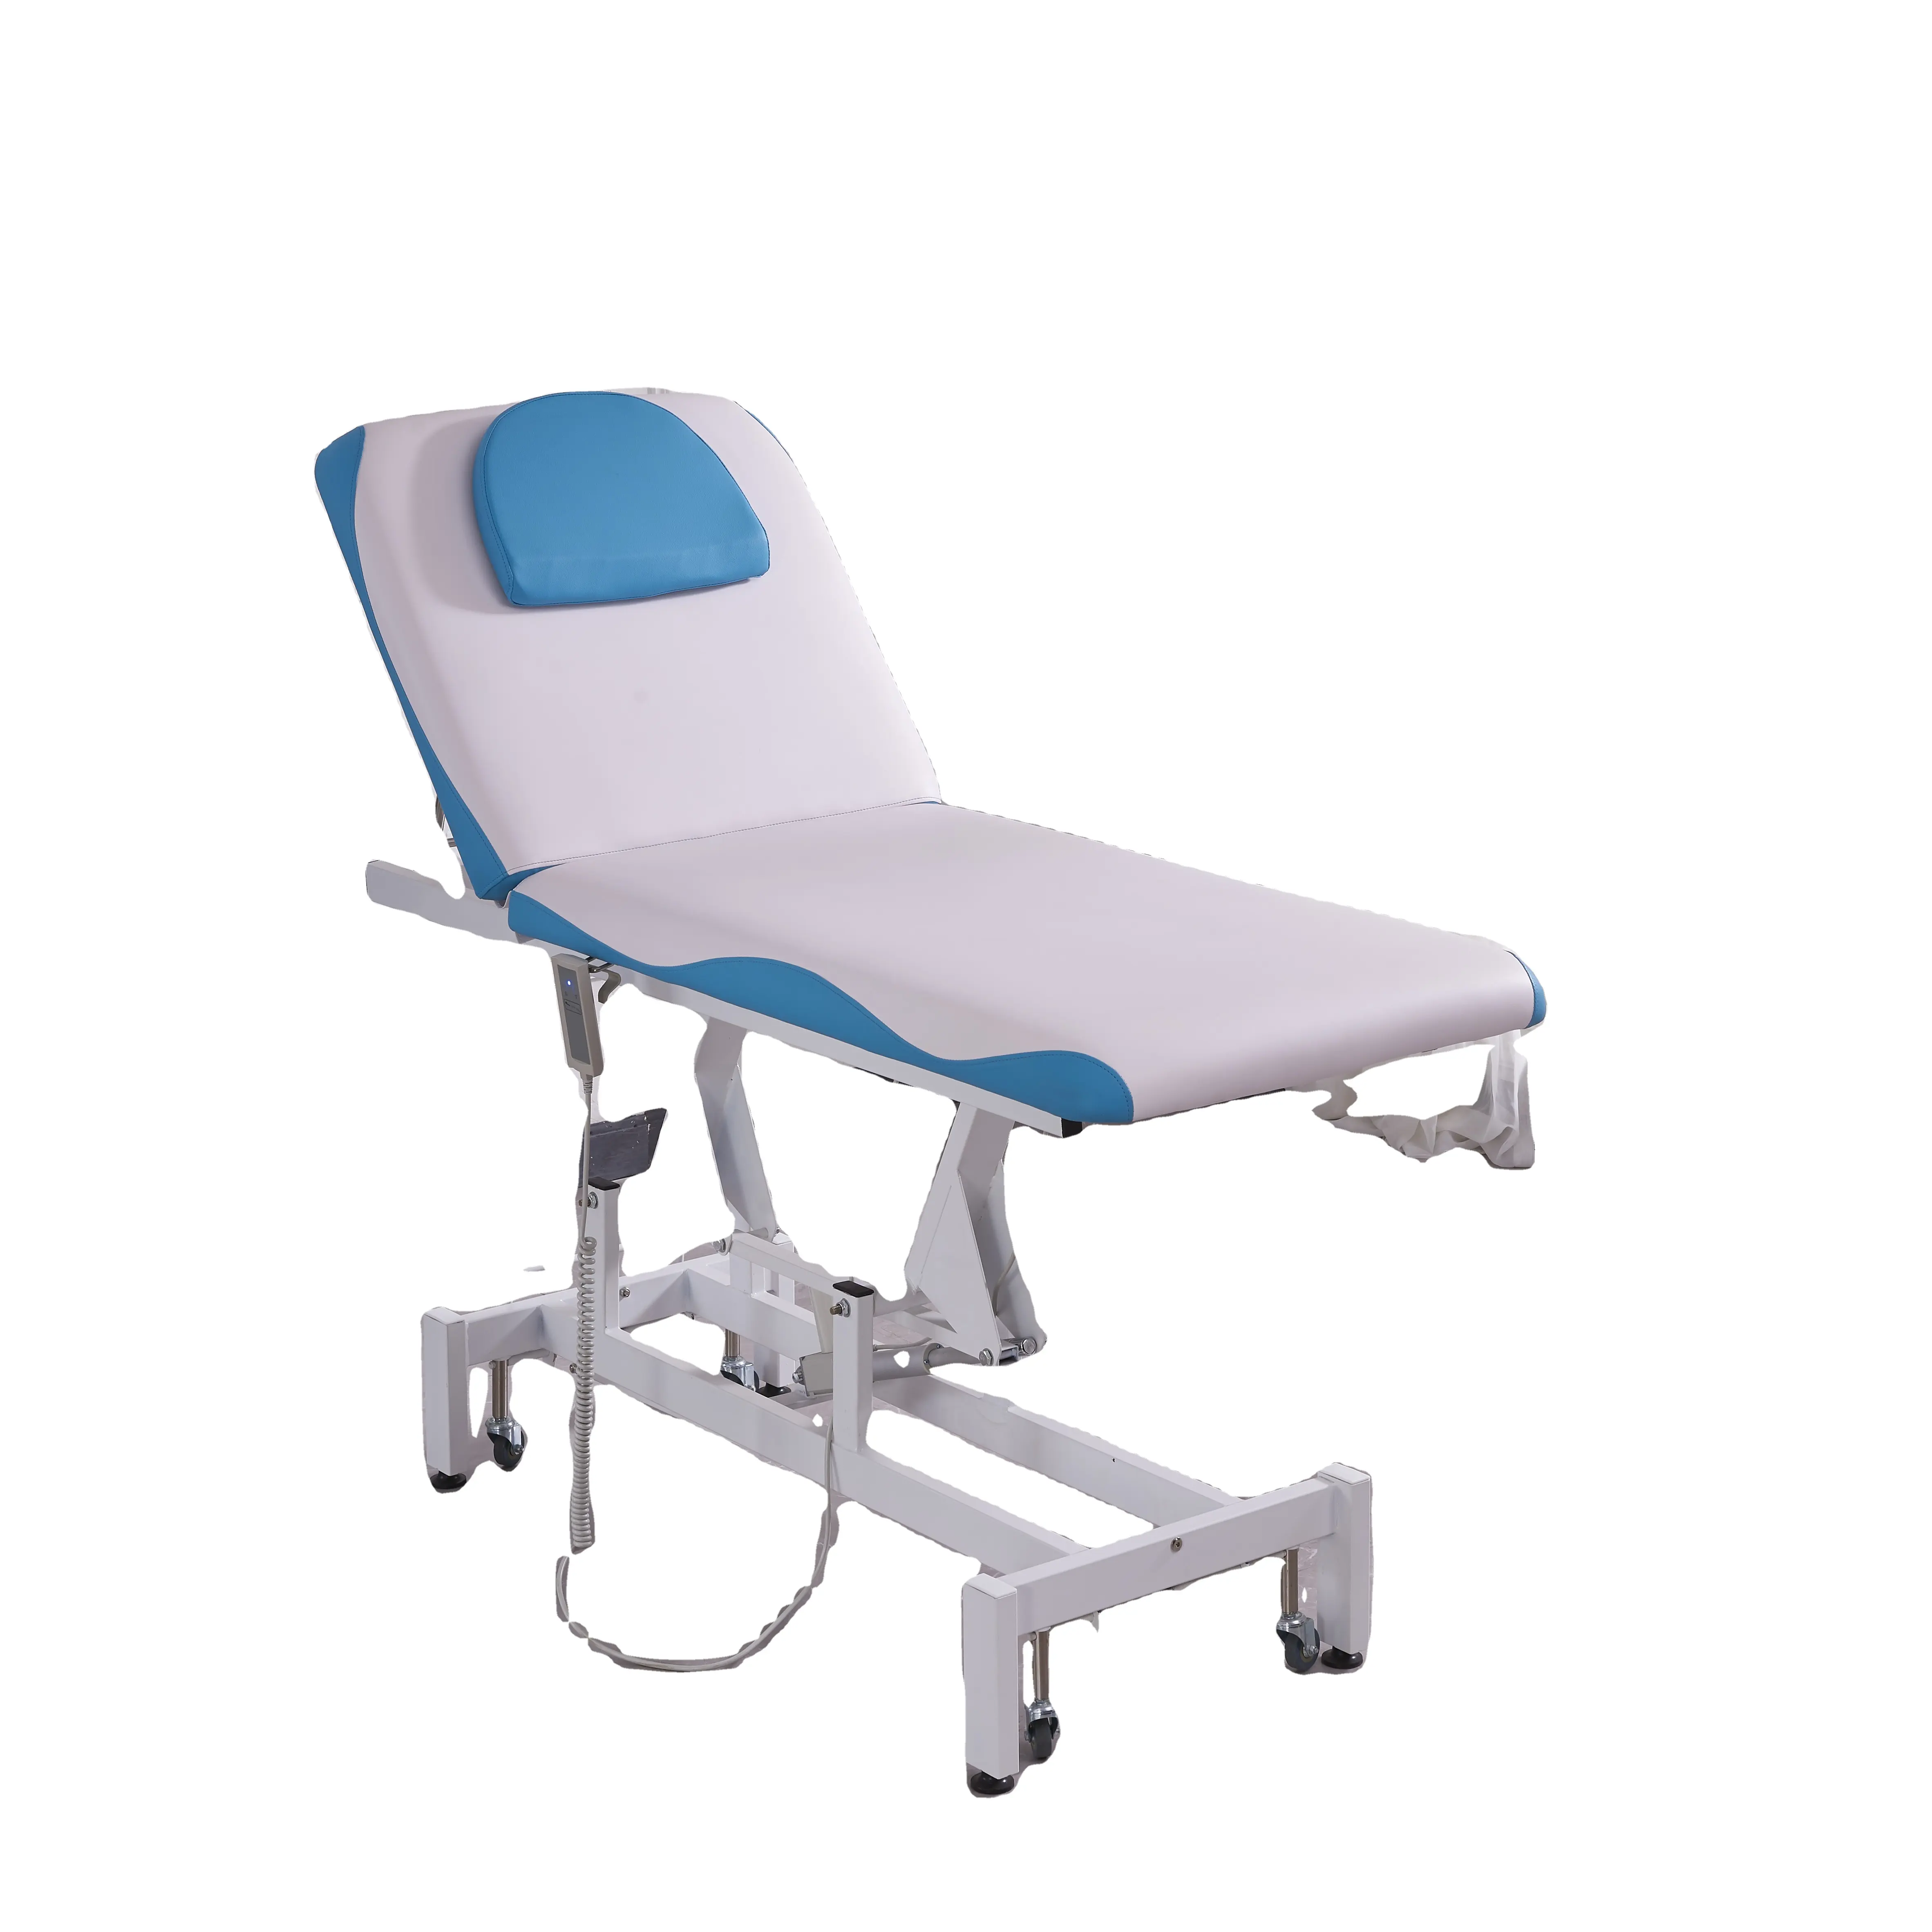 Most Popular Height Adjustable Remote Control Metal Base With 2 Castors Medical Electric Physical Therapy Bed